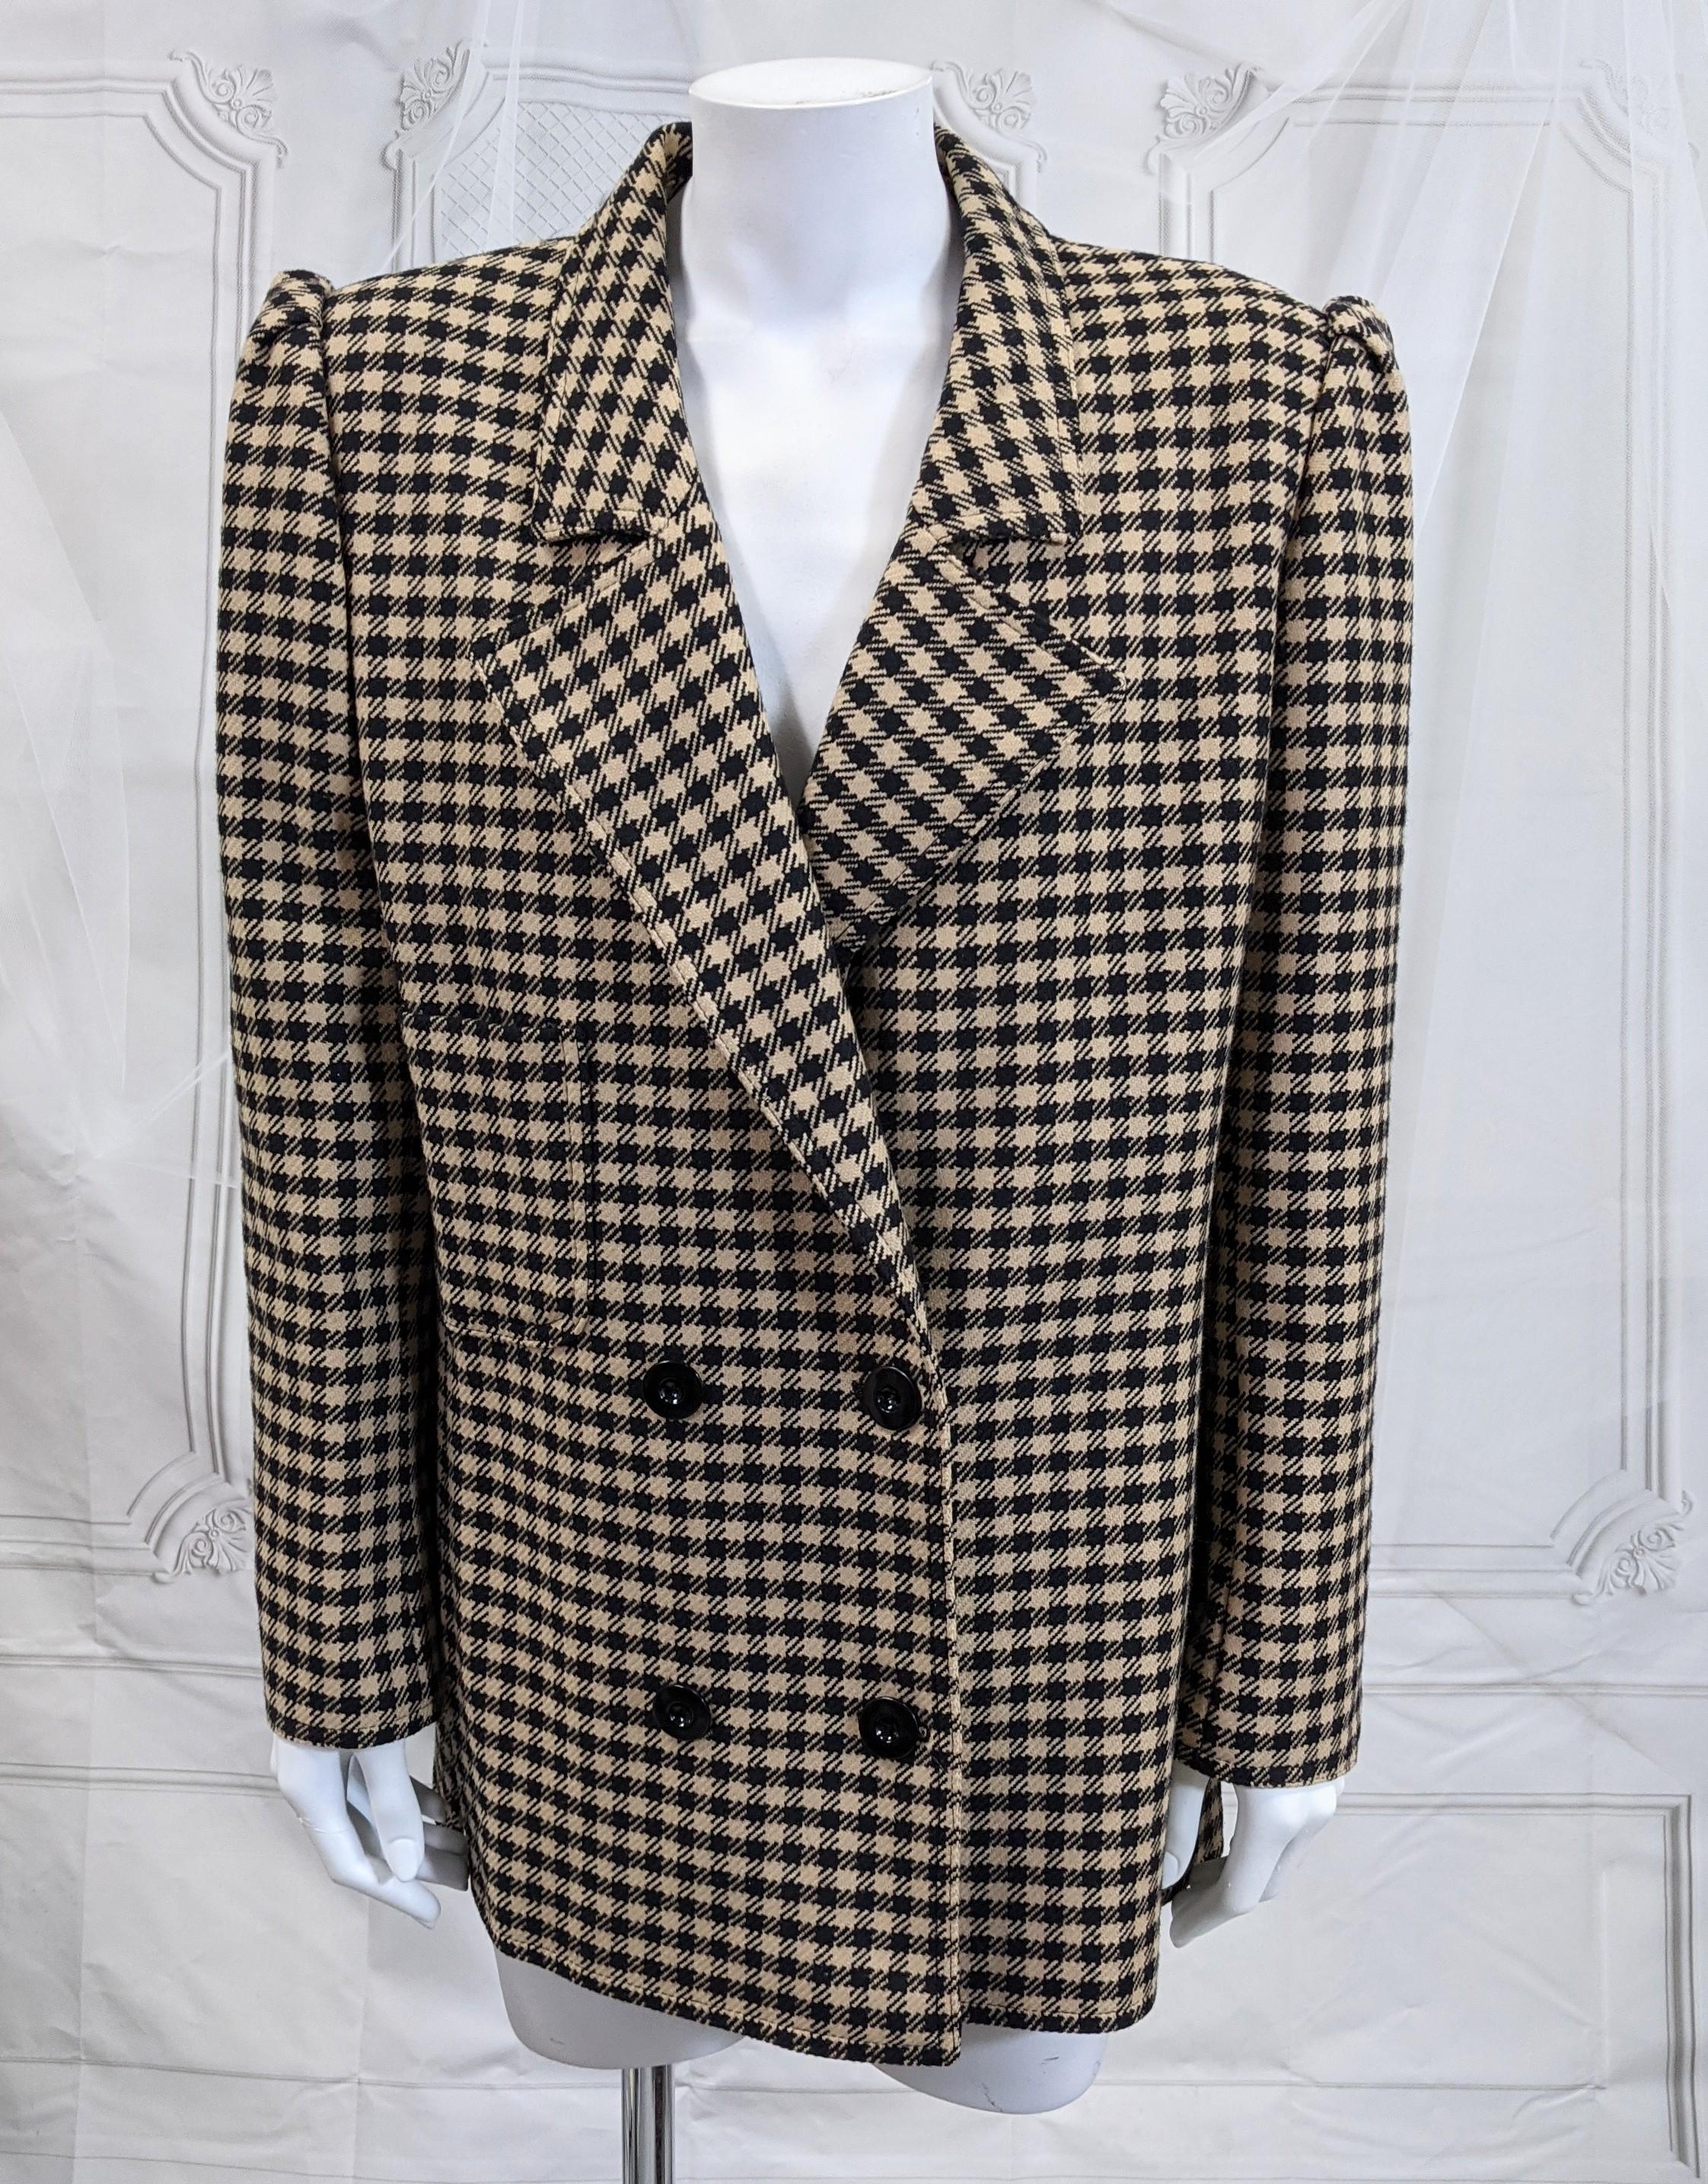 Valentino Houndstooth Lambswool Blazer with puff sleeves, double breasted styling with a slim, straight cut and small side slits. A great classic jacket staple in taupey camel and black. The addition of the gathered sleeves and lowered notch collar